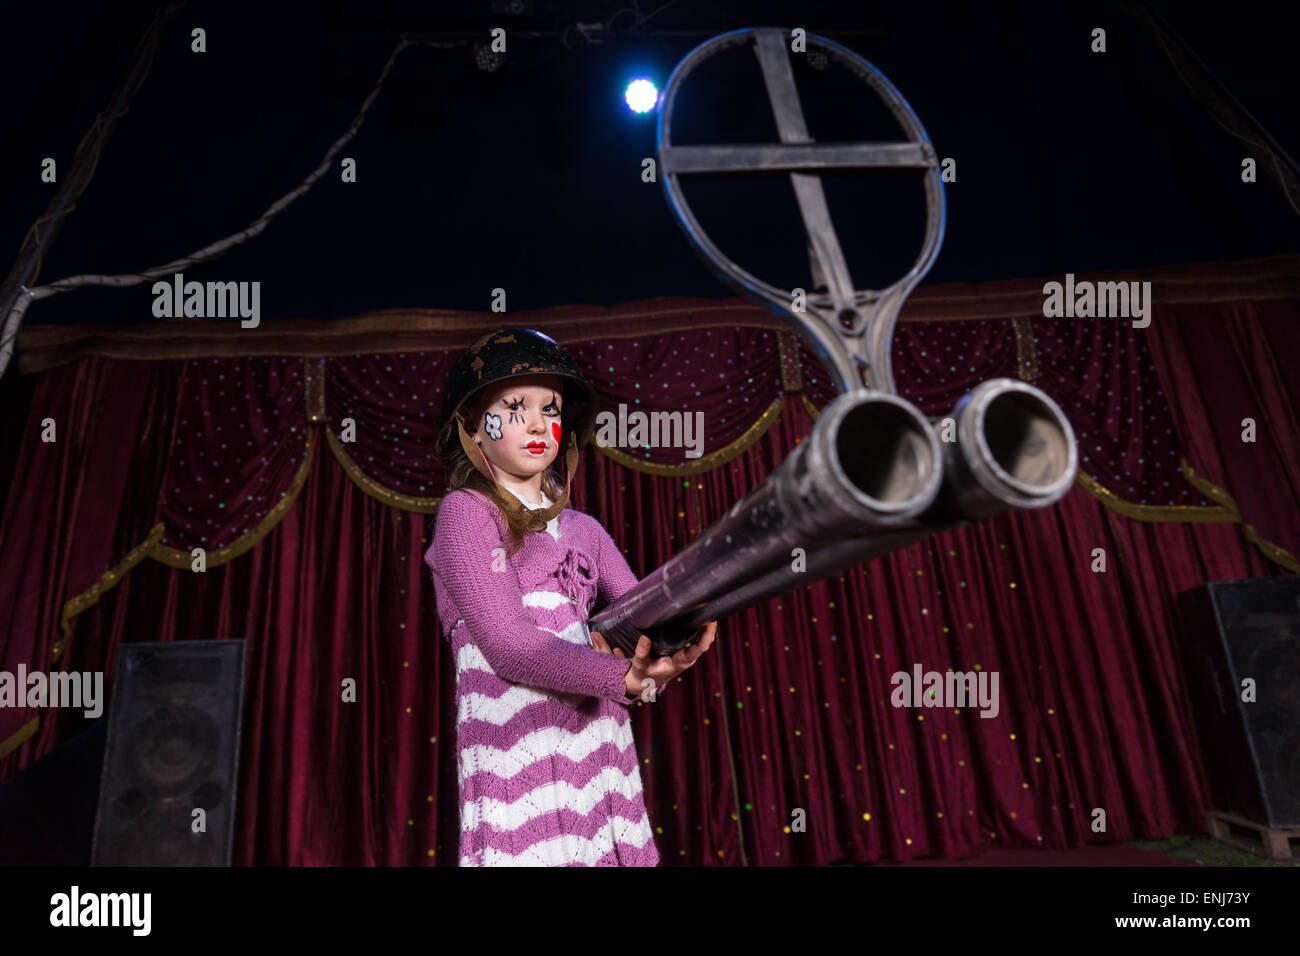 Girl with Painted Face Wearing Over Sized Helmet Holding Large Double Barreled Gun on Stage with Red Curtain Stock Photo